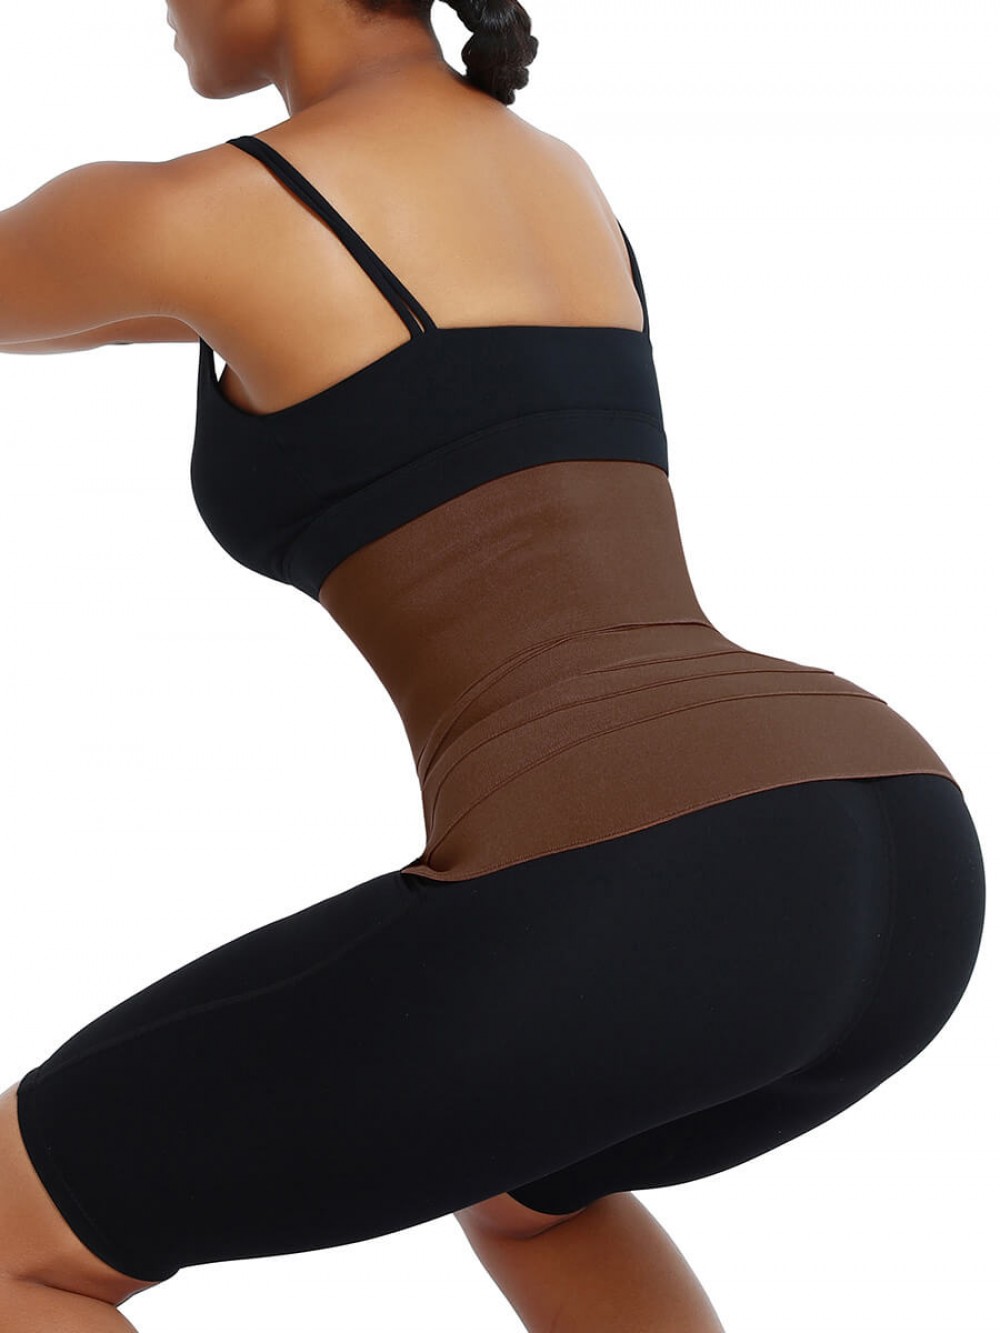 Brown Slimming Tummy Waist Control Wrap Body Shaper For Lose Weight